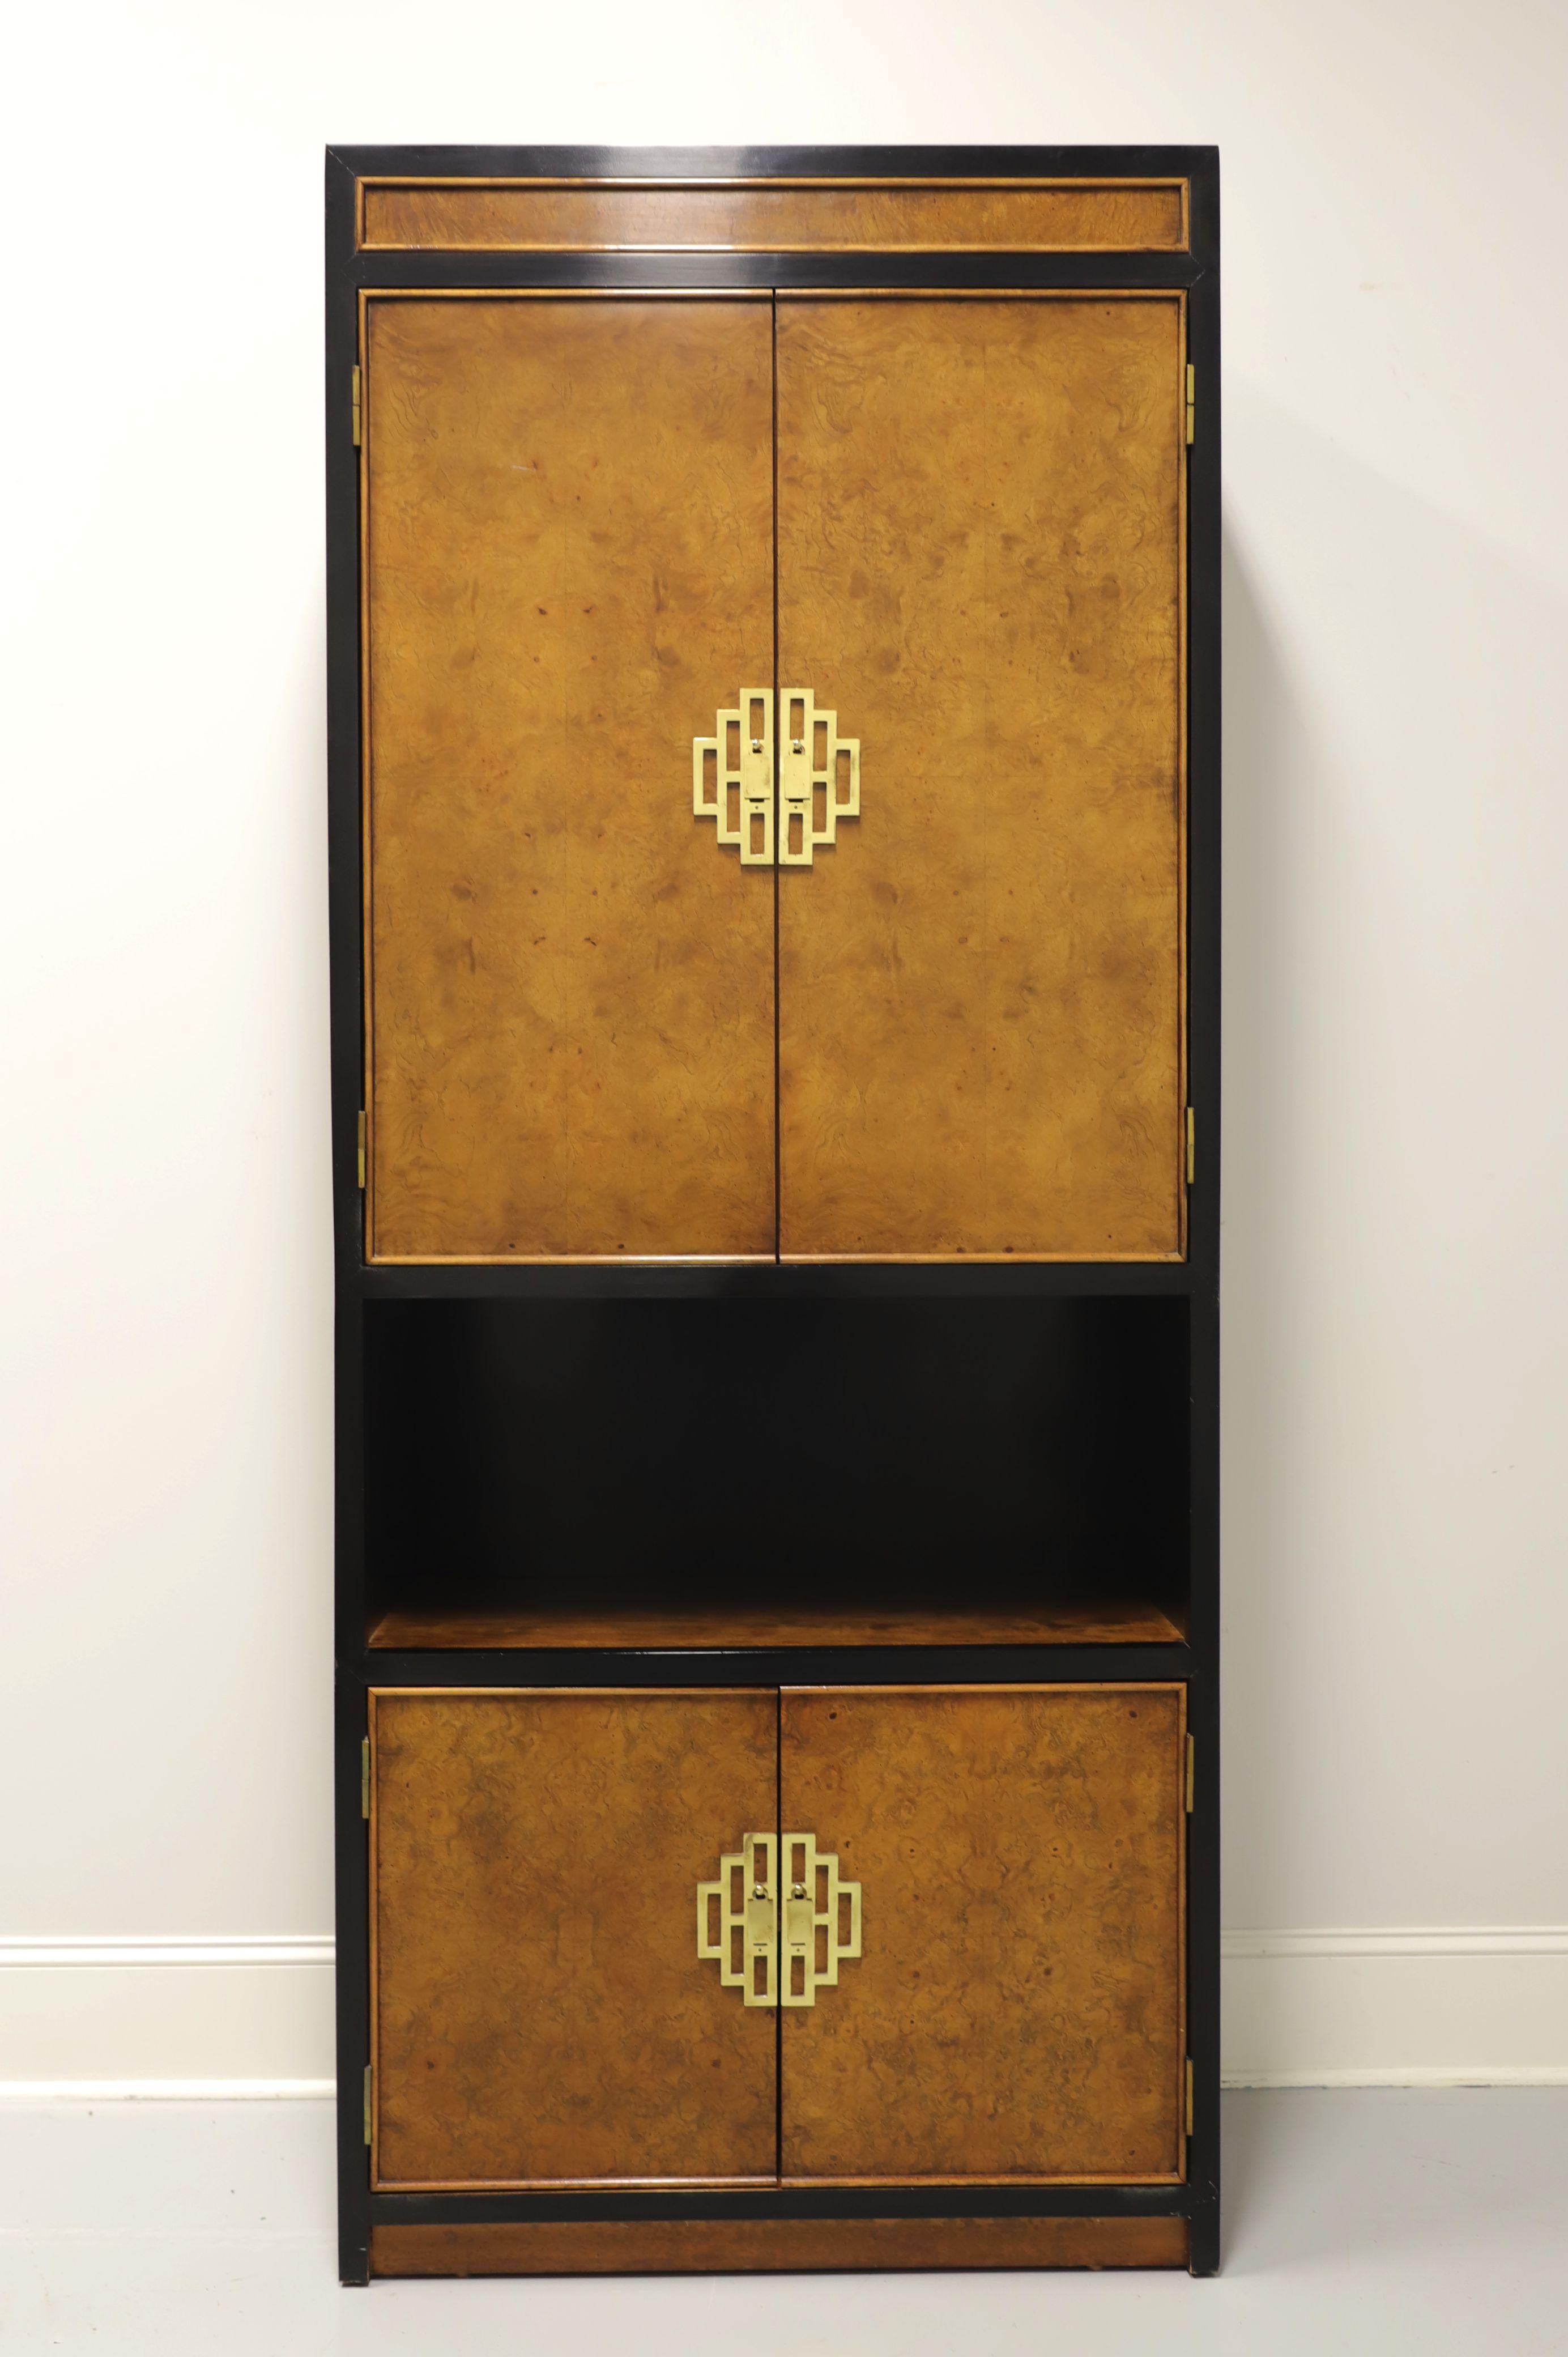 An Asian style bar cabinet by top-quality furniture maker Century Furniture, from their 